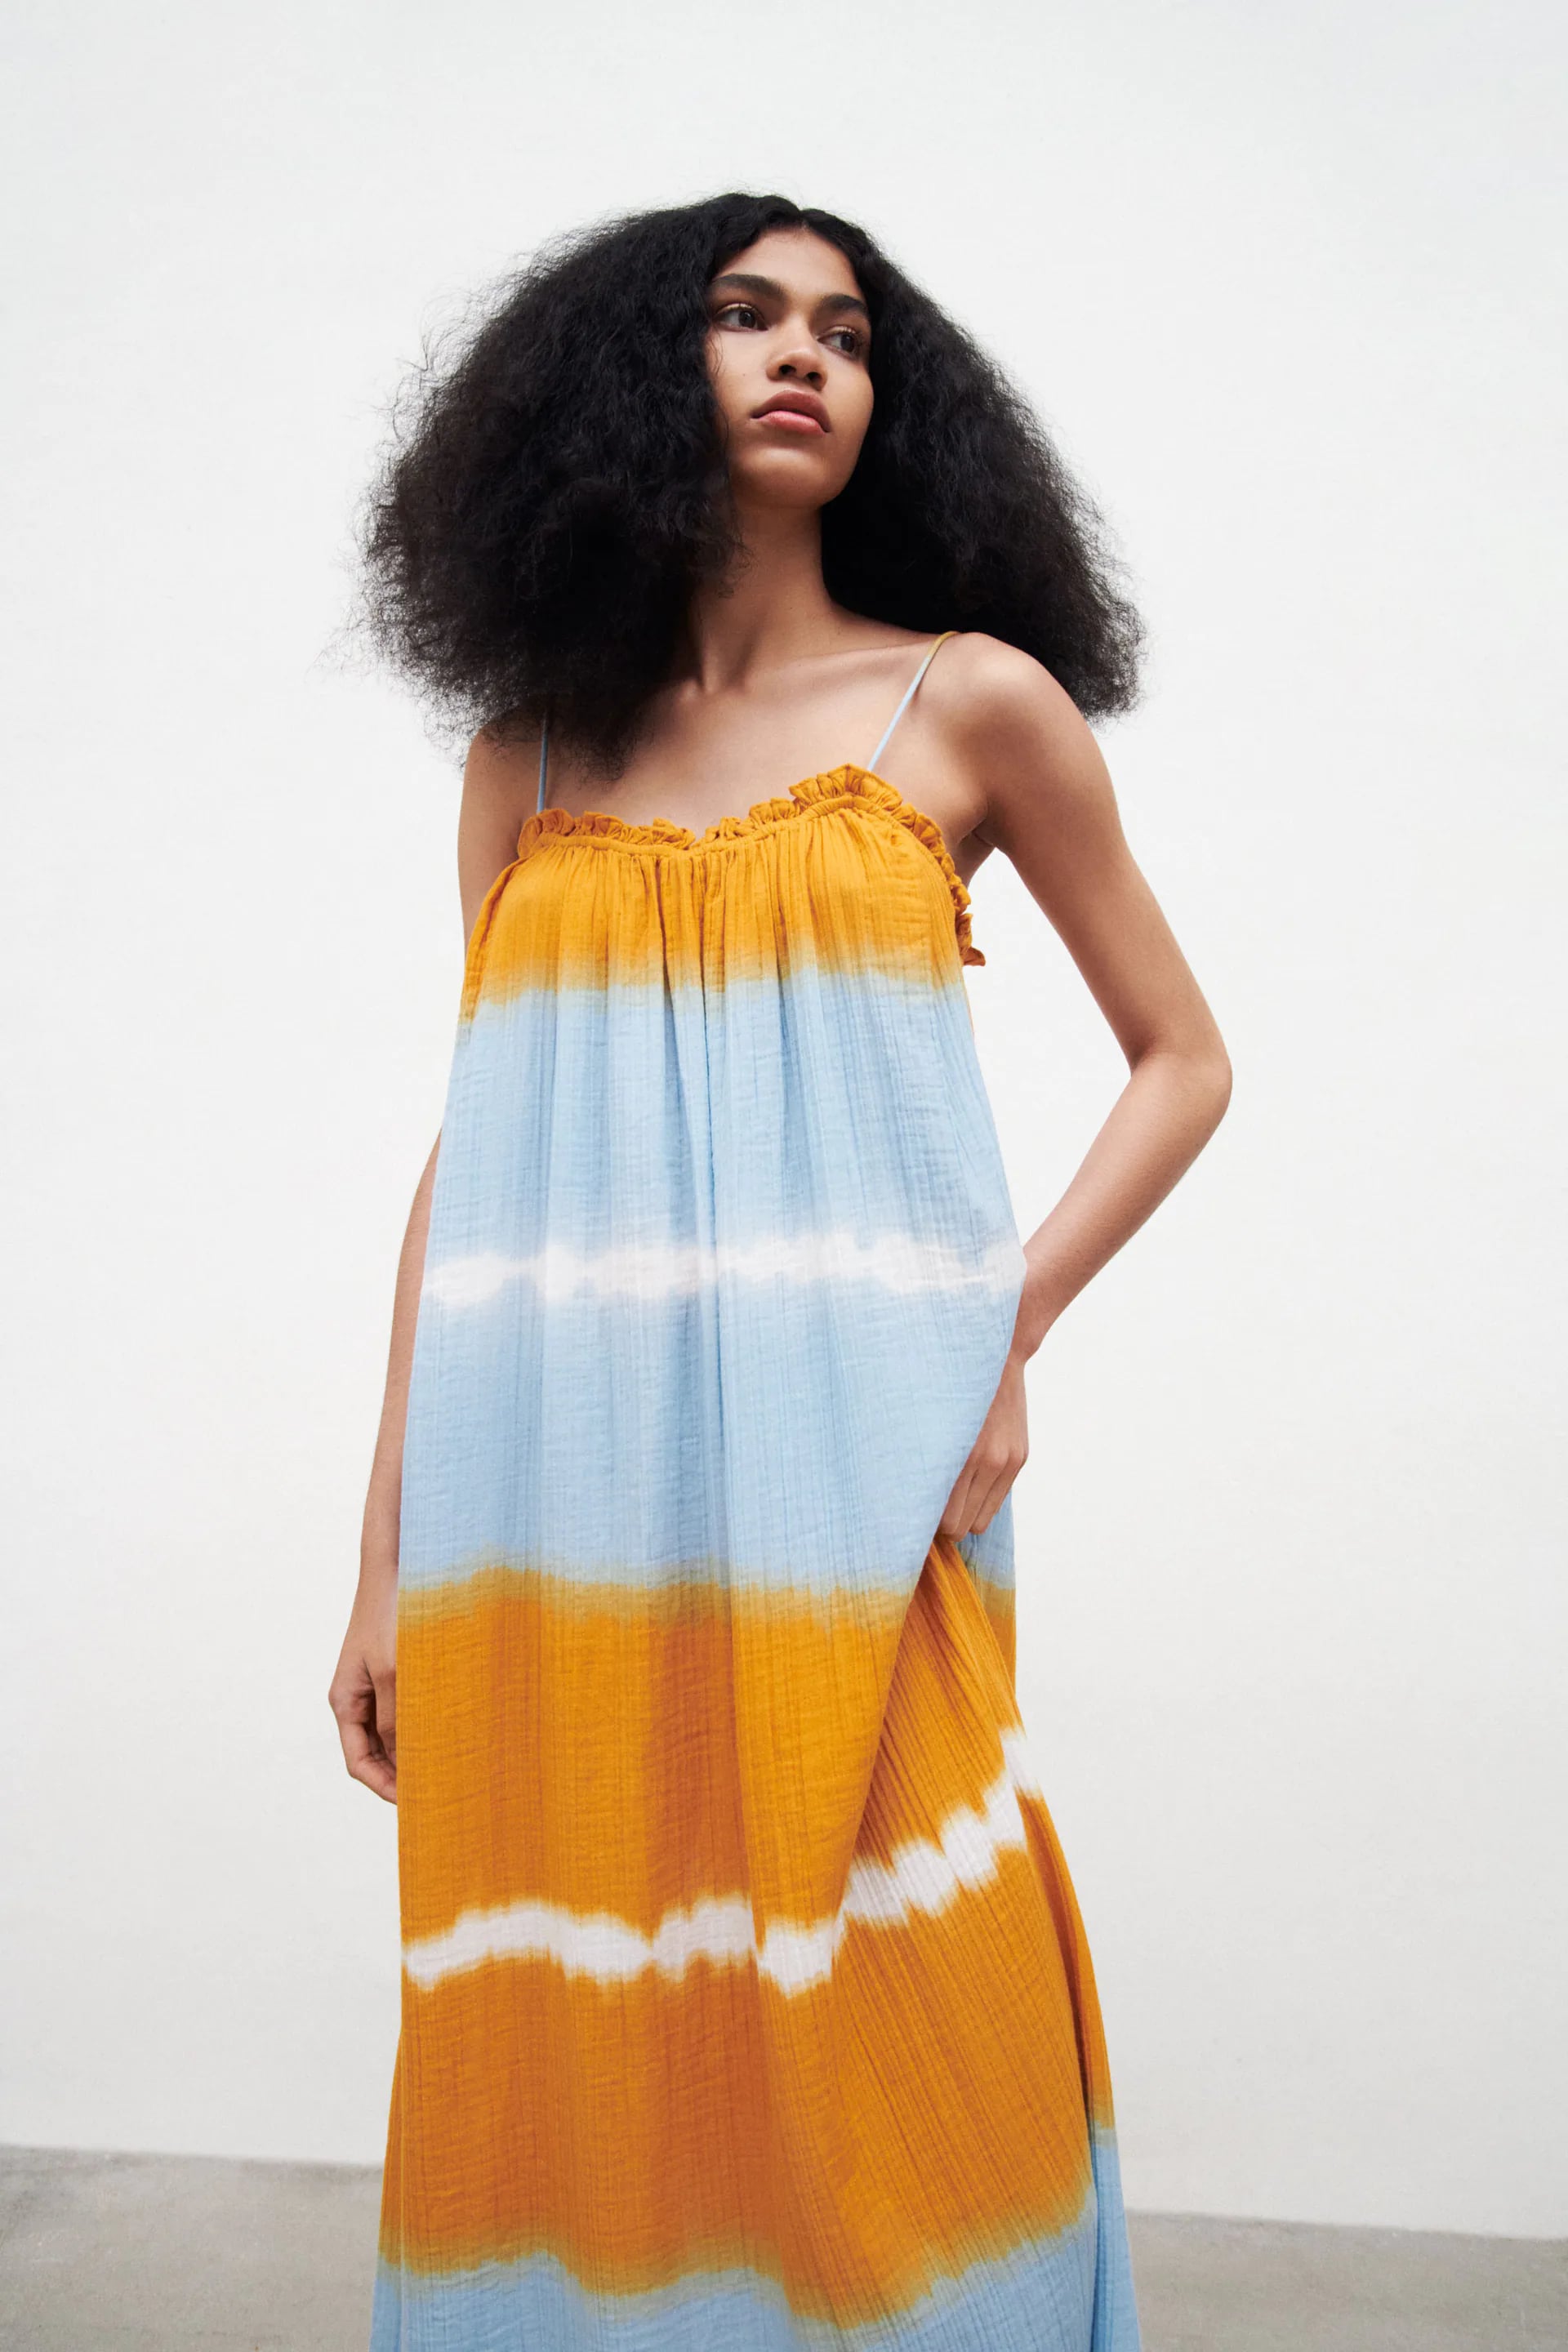 For a Beach-Ready Pick: Tie-Dye Gauze Dress | 41 Zara Pieces That'll Make You Look and Feel Fabulous, All Under $100 | POPSUGAR Fashion Photo 15